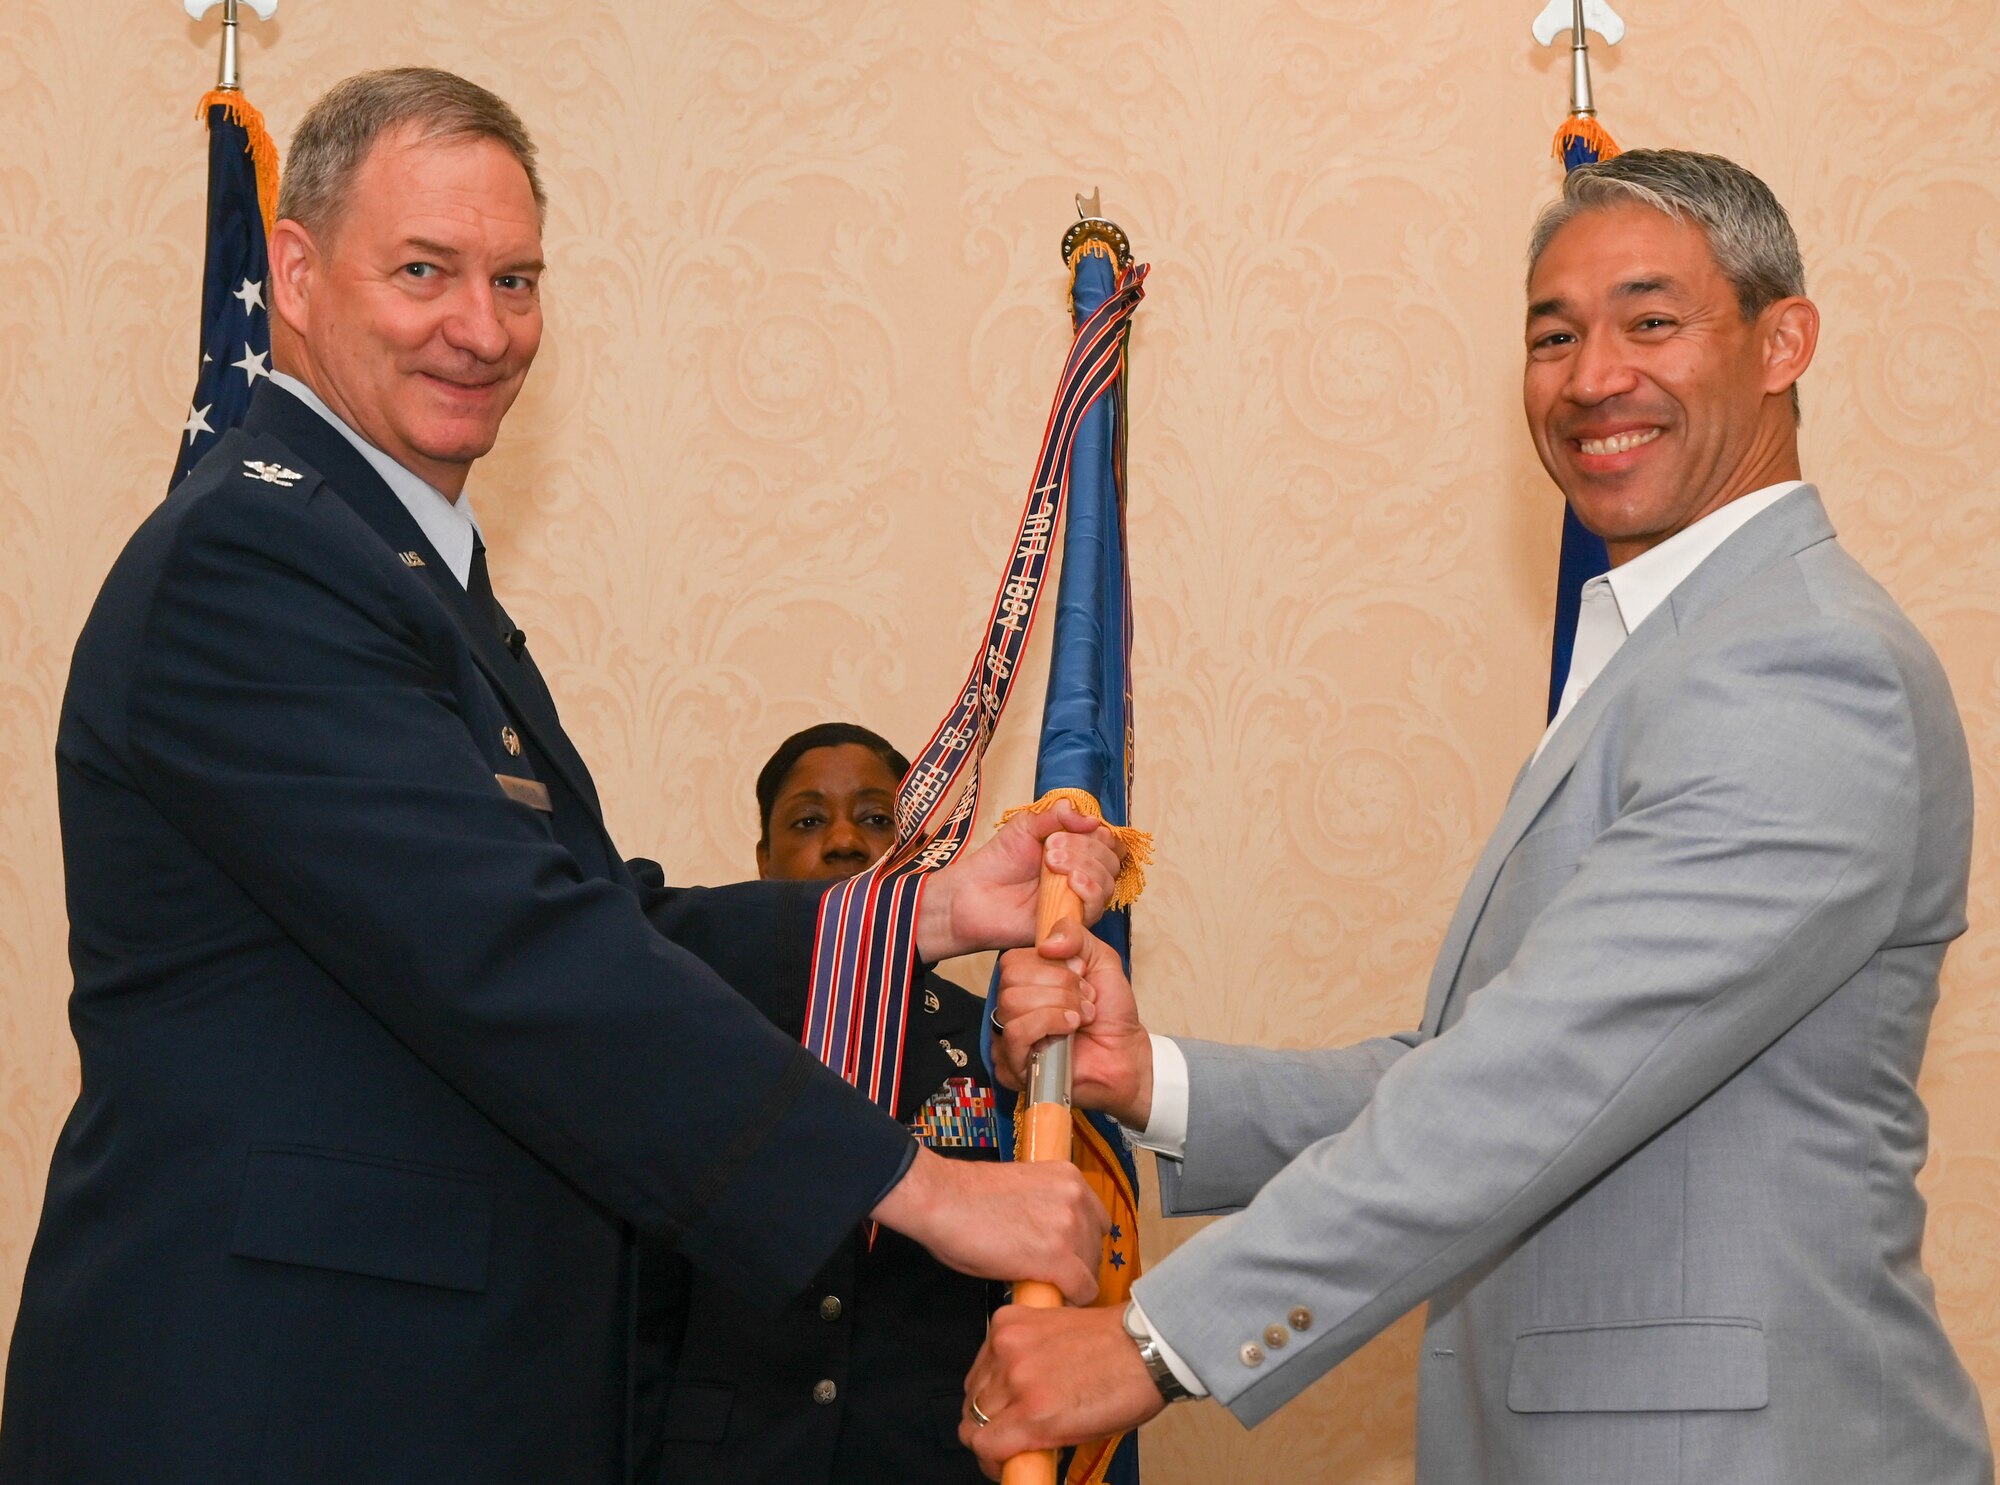 Ron Nirenberg, City of San Antonio mayor, assumes honorary command of the 433rd Airlift Wing from Col. Terry McClain, 433rd AW commander, during the Honorary Commanders’ induction ceremony in San Antonio, April 2, 2022. The intent of the 433rd AW Honorary Commanders Program is to foster friendship between local and military communities. (U.S. Air Force photo by Airman 1st Class Mark Colmenares)